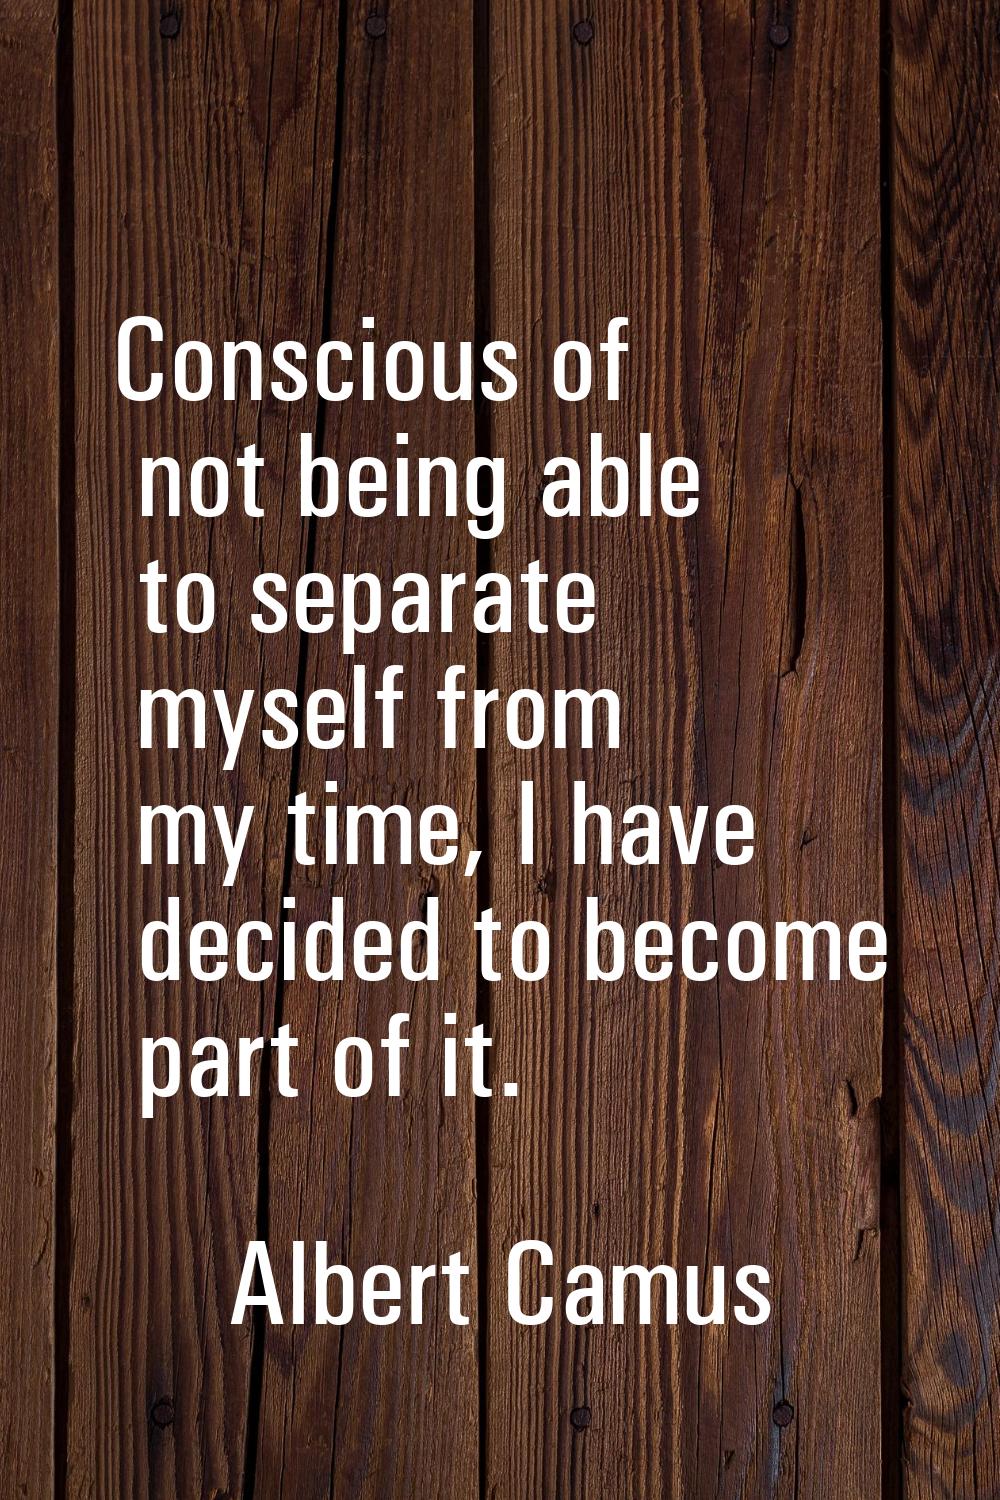 Conscious of not being able to separate myself from my time, I have decided to become part of it.